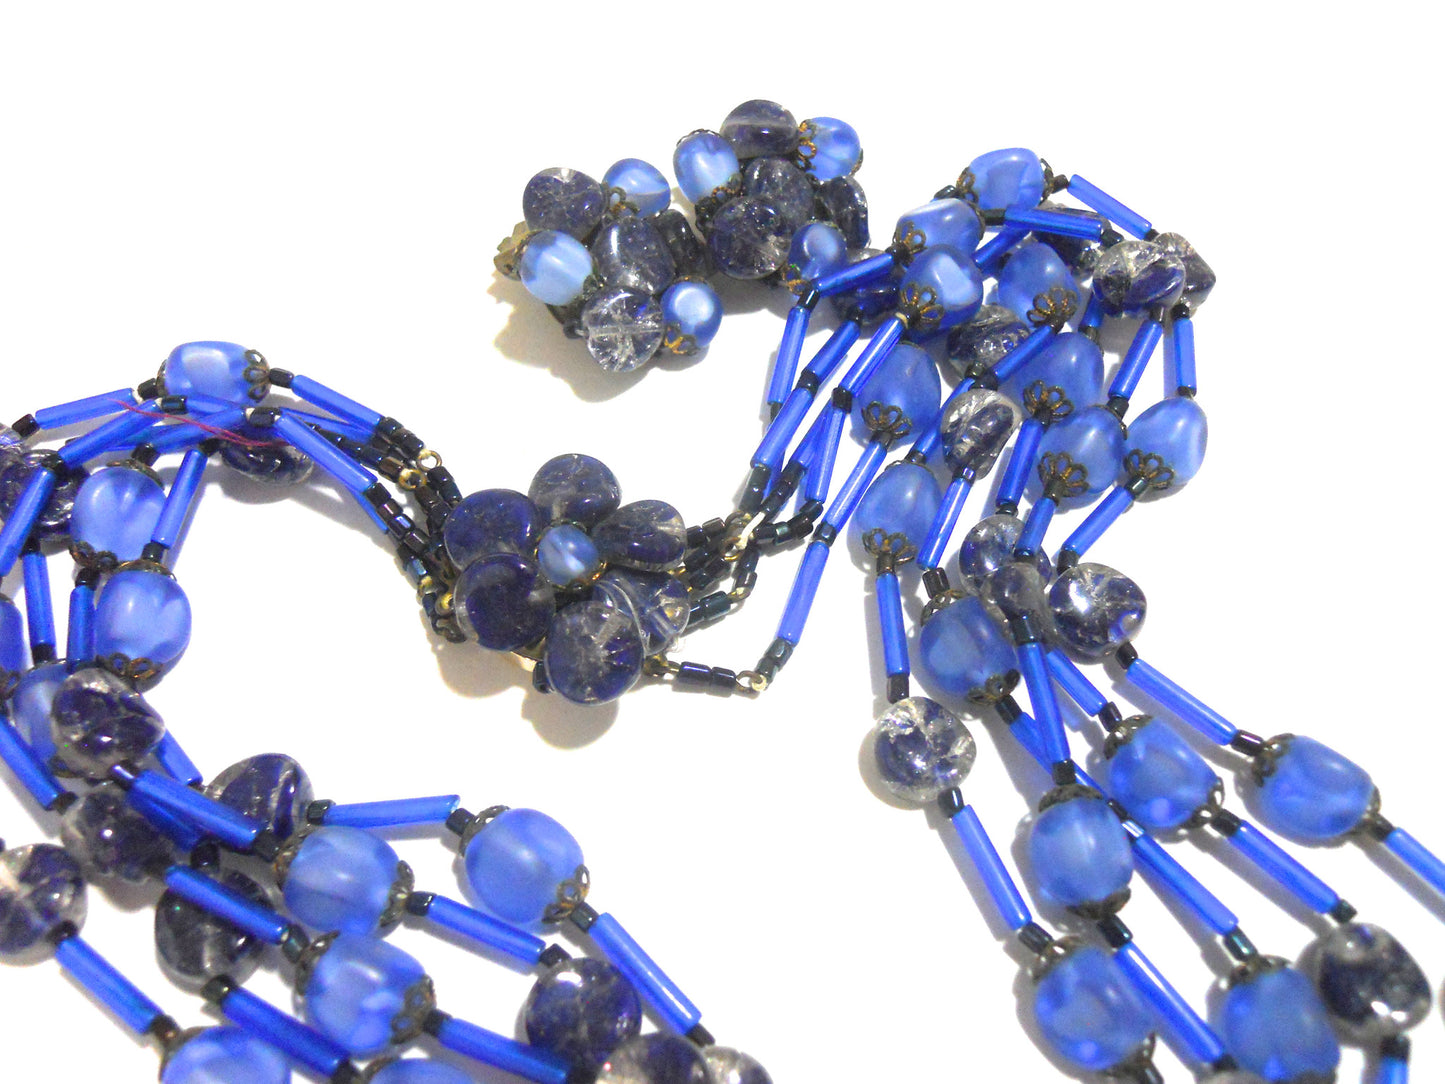 Swirled Blue Beaded Multi-Strand Necklace and Clip Earrings circa 1960s